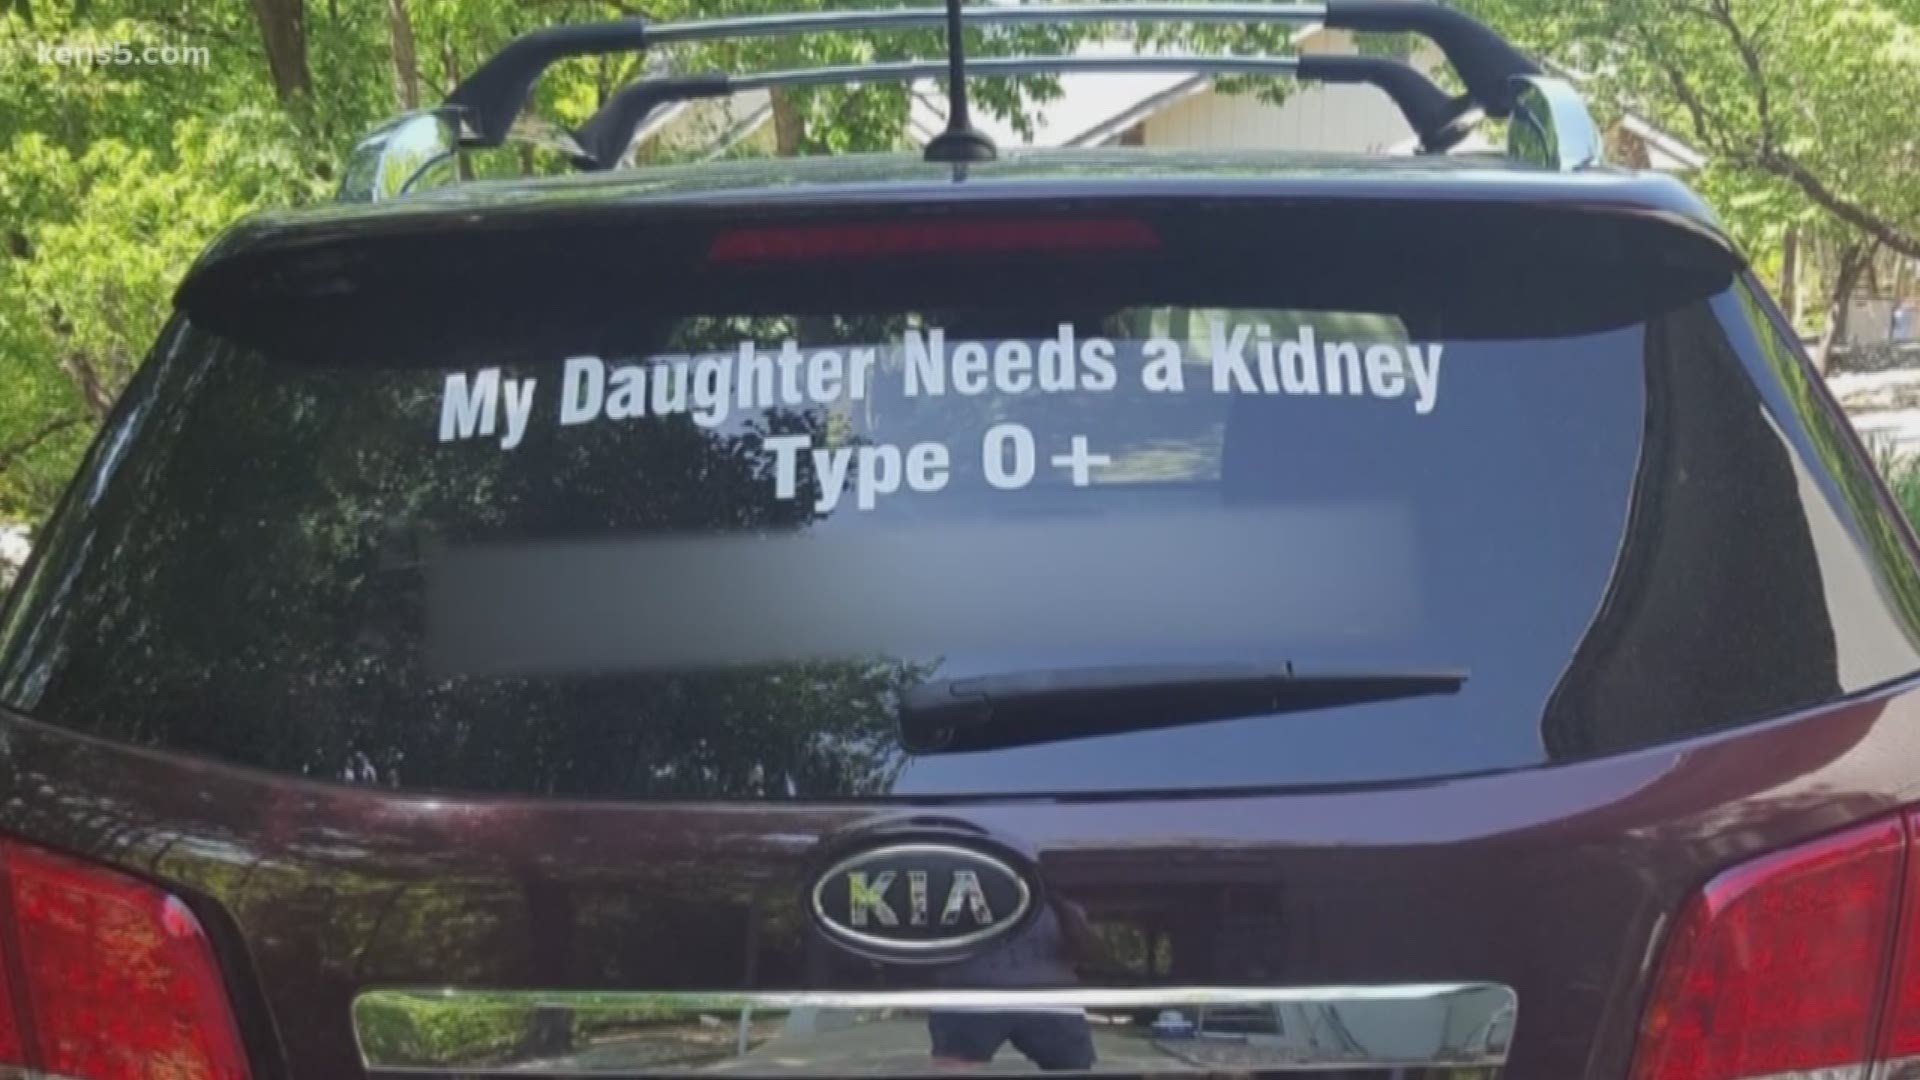 A local family went above and beyond to help their loved one receive a life-saving organ transplant by using a car decal to reach as many people as possible.